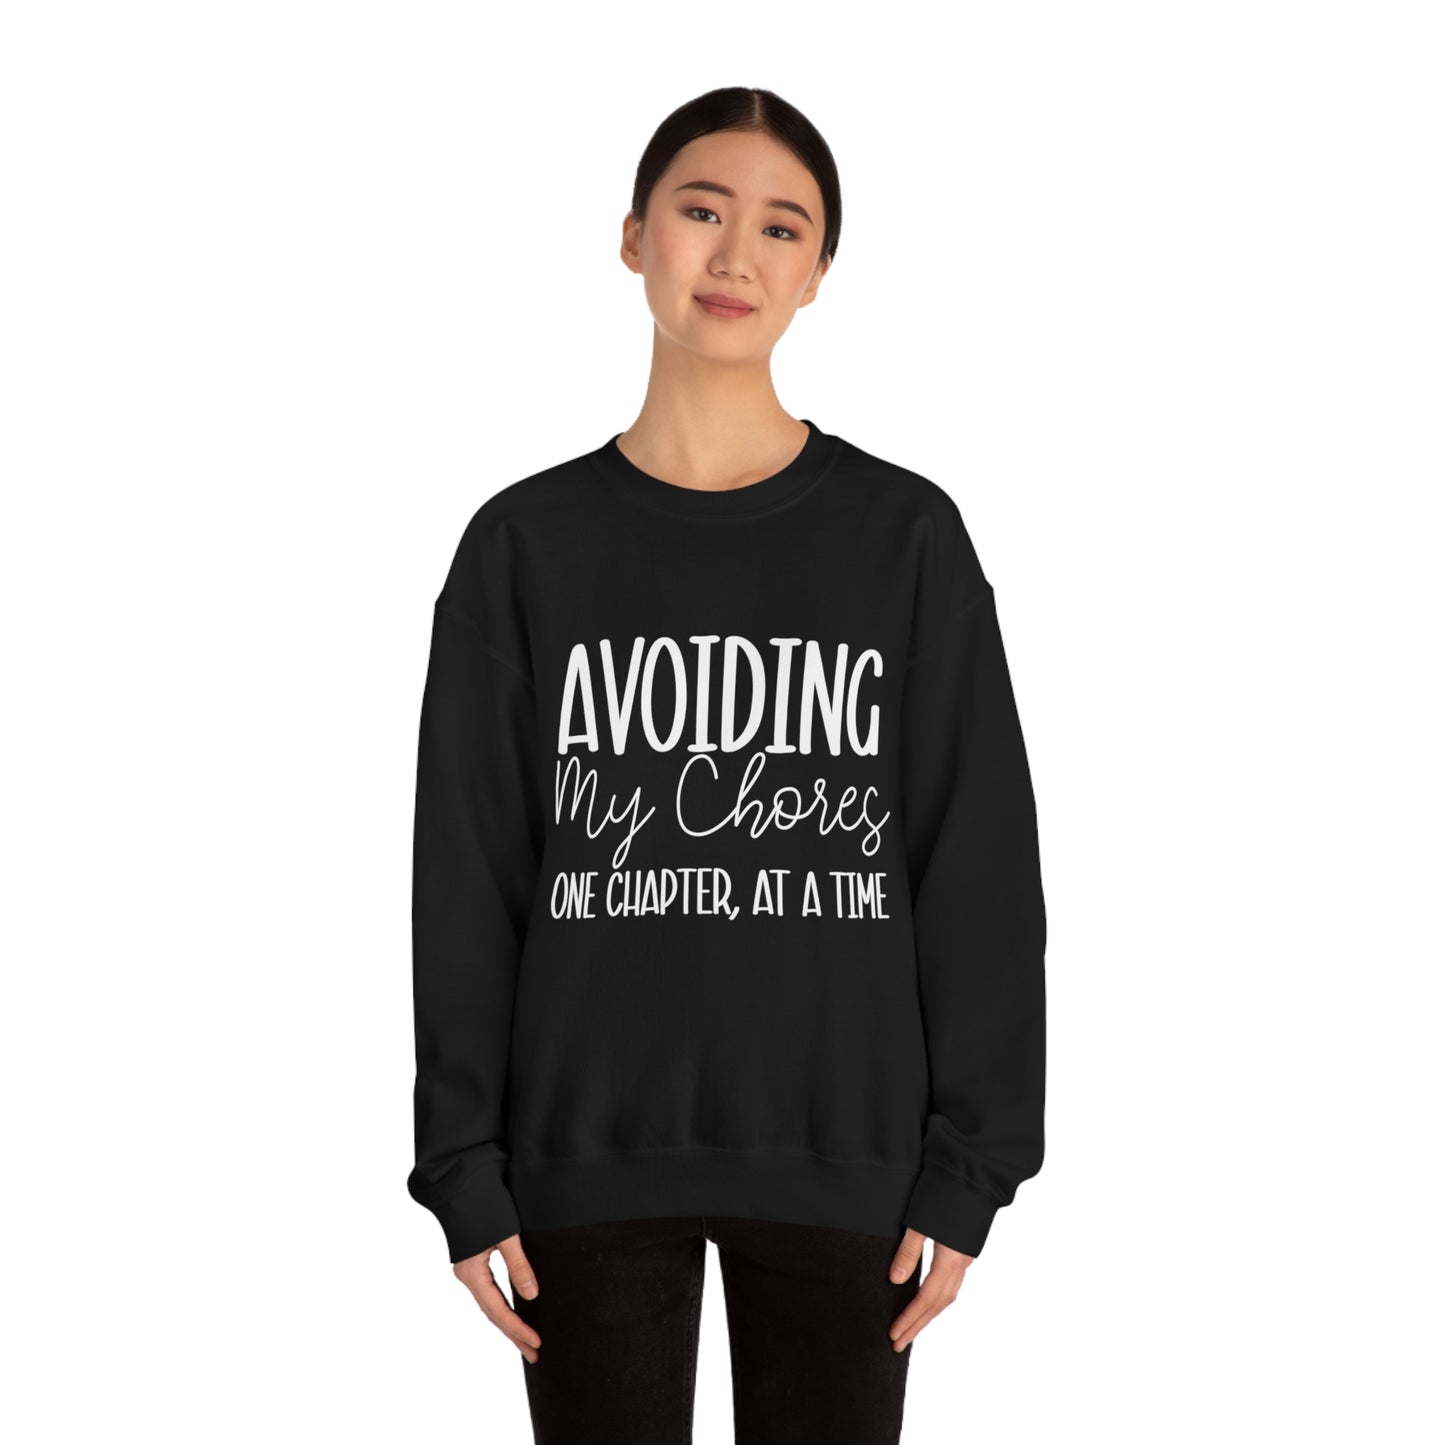 Avoiding My Chores One Chapter At A Time Crewneck Sweatshirt